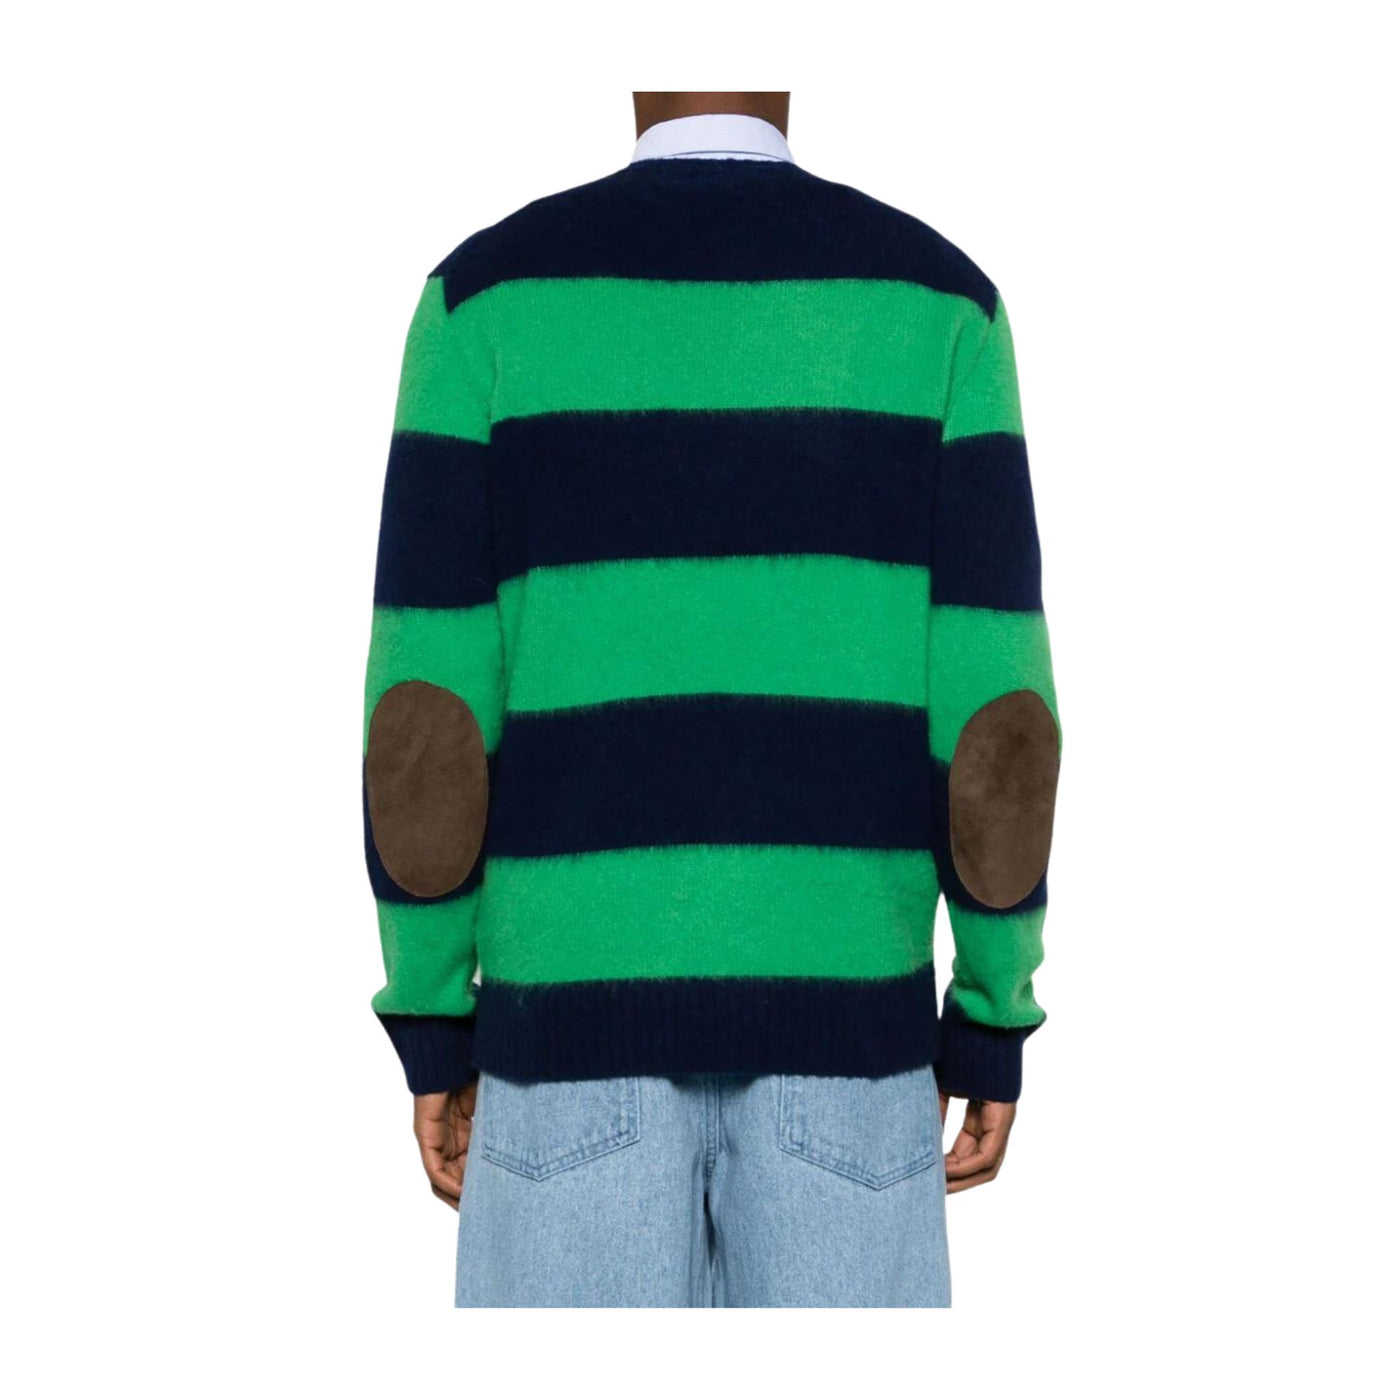 Men's sweater with striped pattern